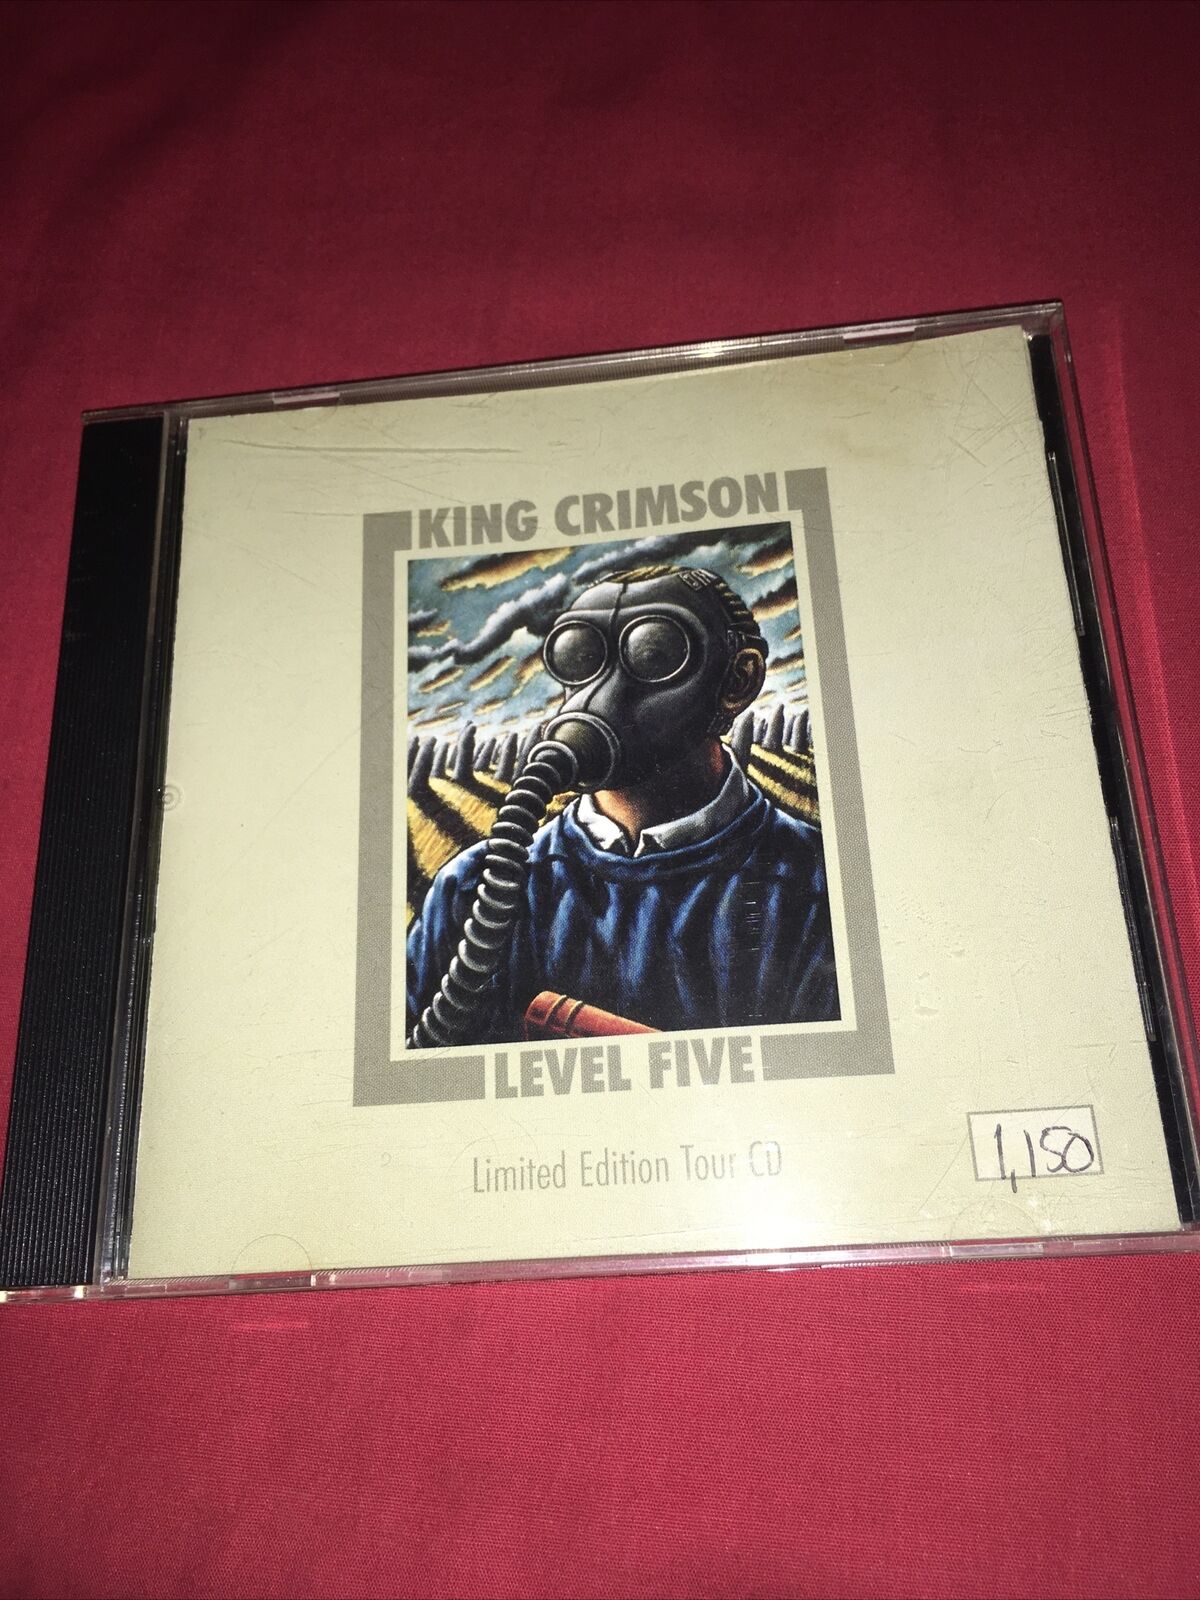 King Crimson Level Five Numbered Limited Edition Tour CD Like New